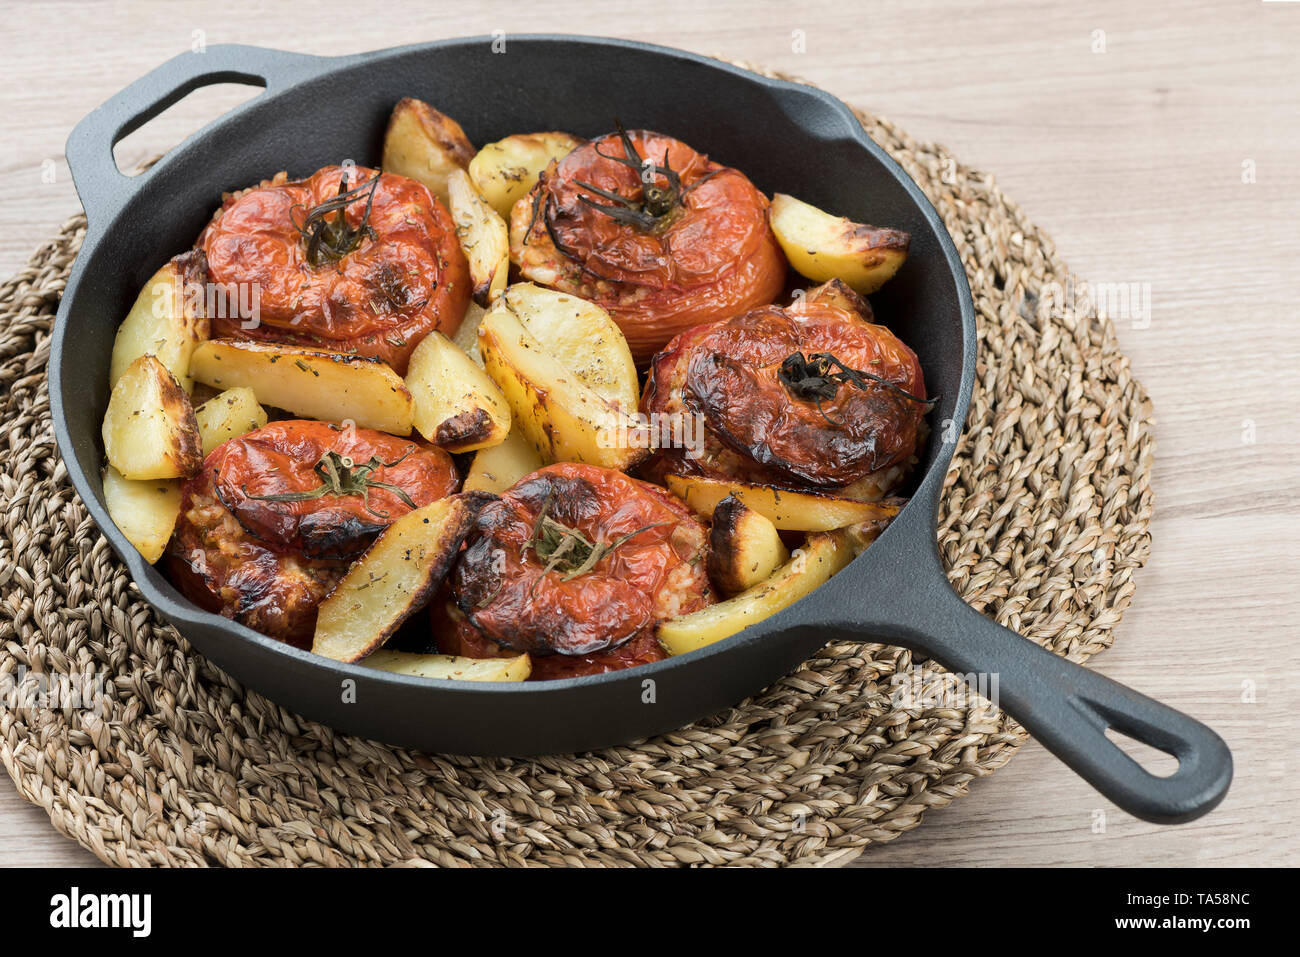 https://c8.alamy.com/comp/TA58NC/cast-iron-pan-with-tomatoes-with-rice-and-baked-potatoes-on-centerpiece-and-light-background-TA58NC.jpg